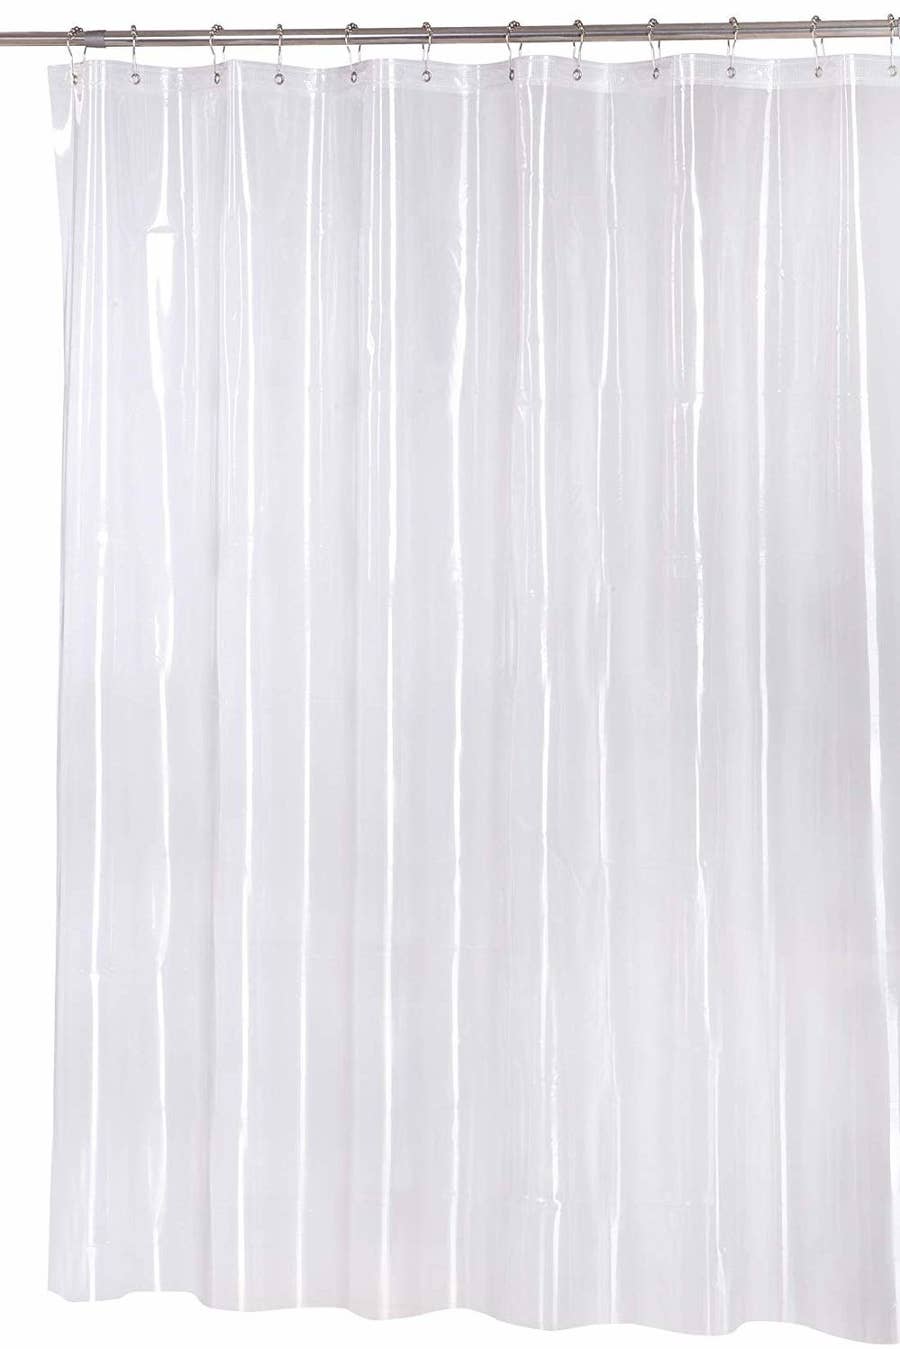 Best Shower Curtains You Can Get On, H&M Shower Curtain